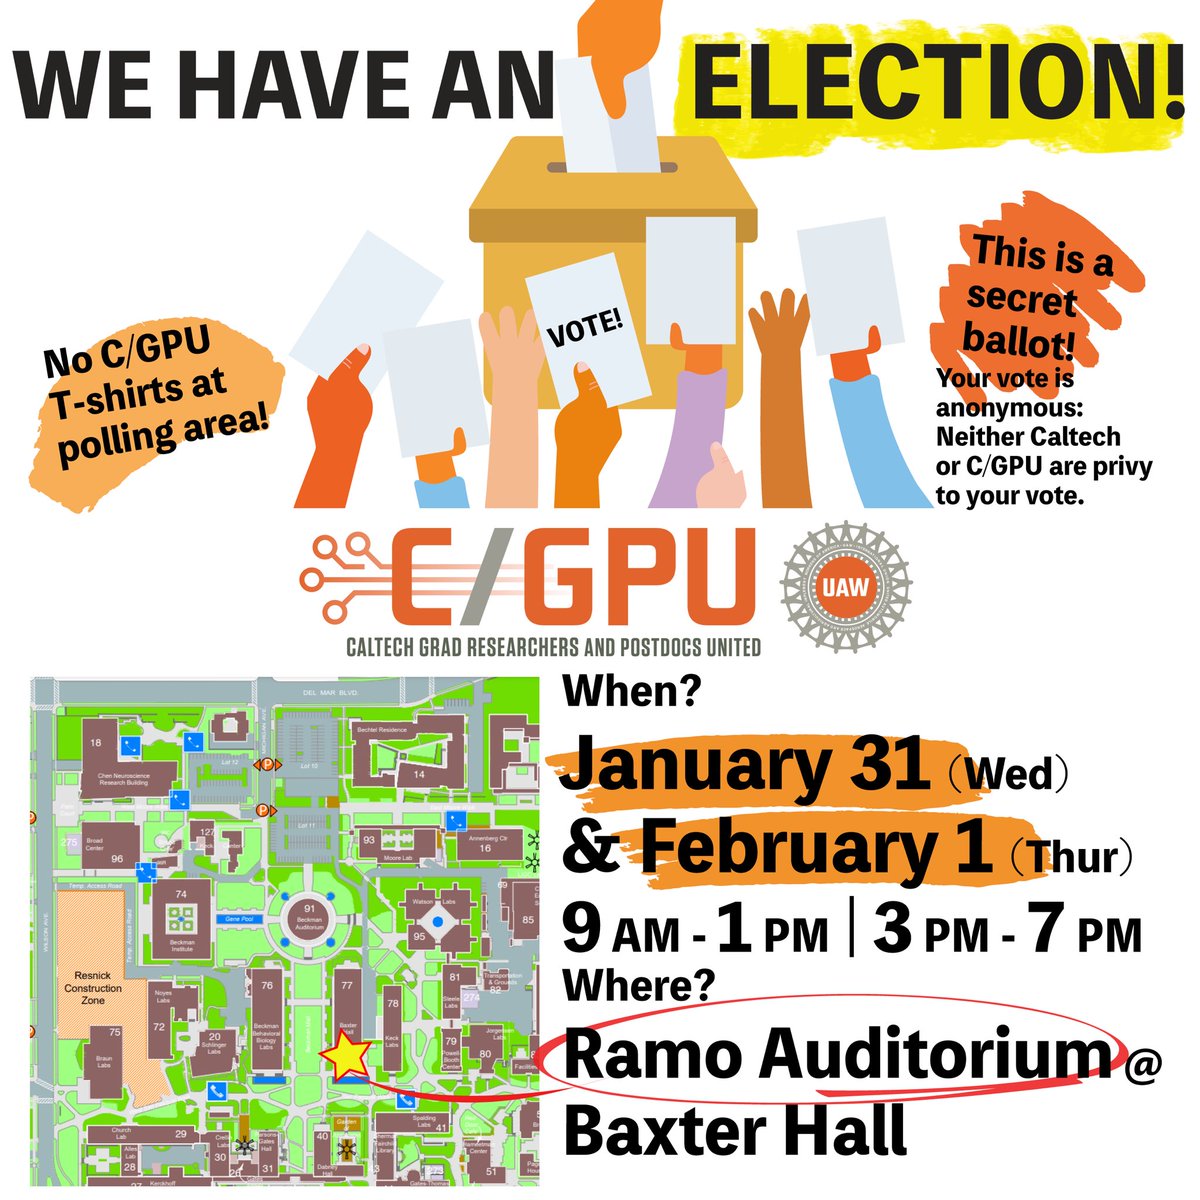 🚨WE HAVE AN ELECTION FOR UNION RECOGNITION🚨 Your YES vote will determine whether or not we officially form our union at Caltech! Election is happening on Wed, Jan 31 & Thurs, Feb 1st 9AM-1PM | 3PM-7PM on BOTH days. It'll be at Ramo Auditorium, Baxter Hall!